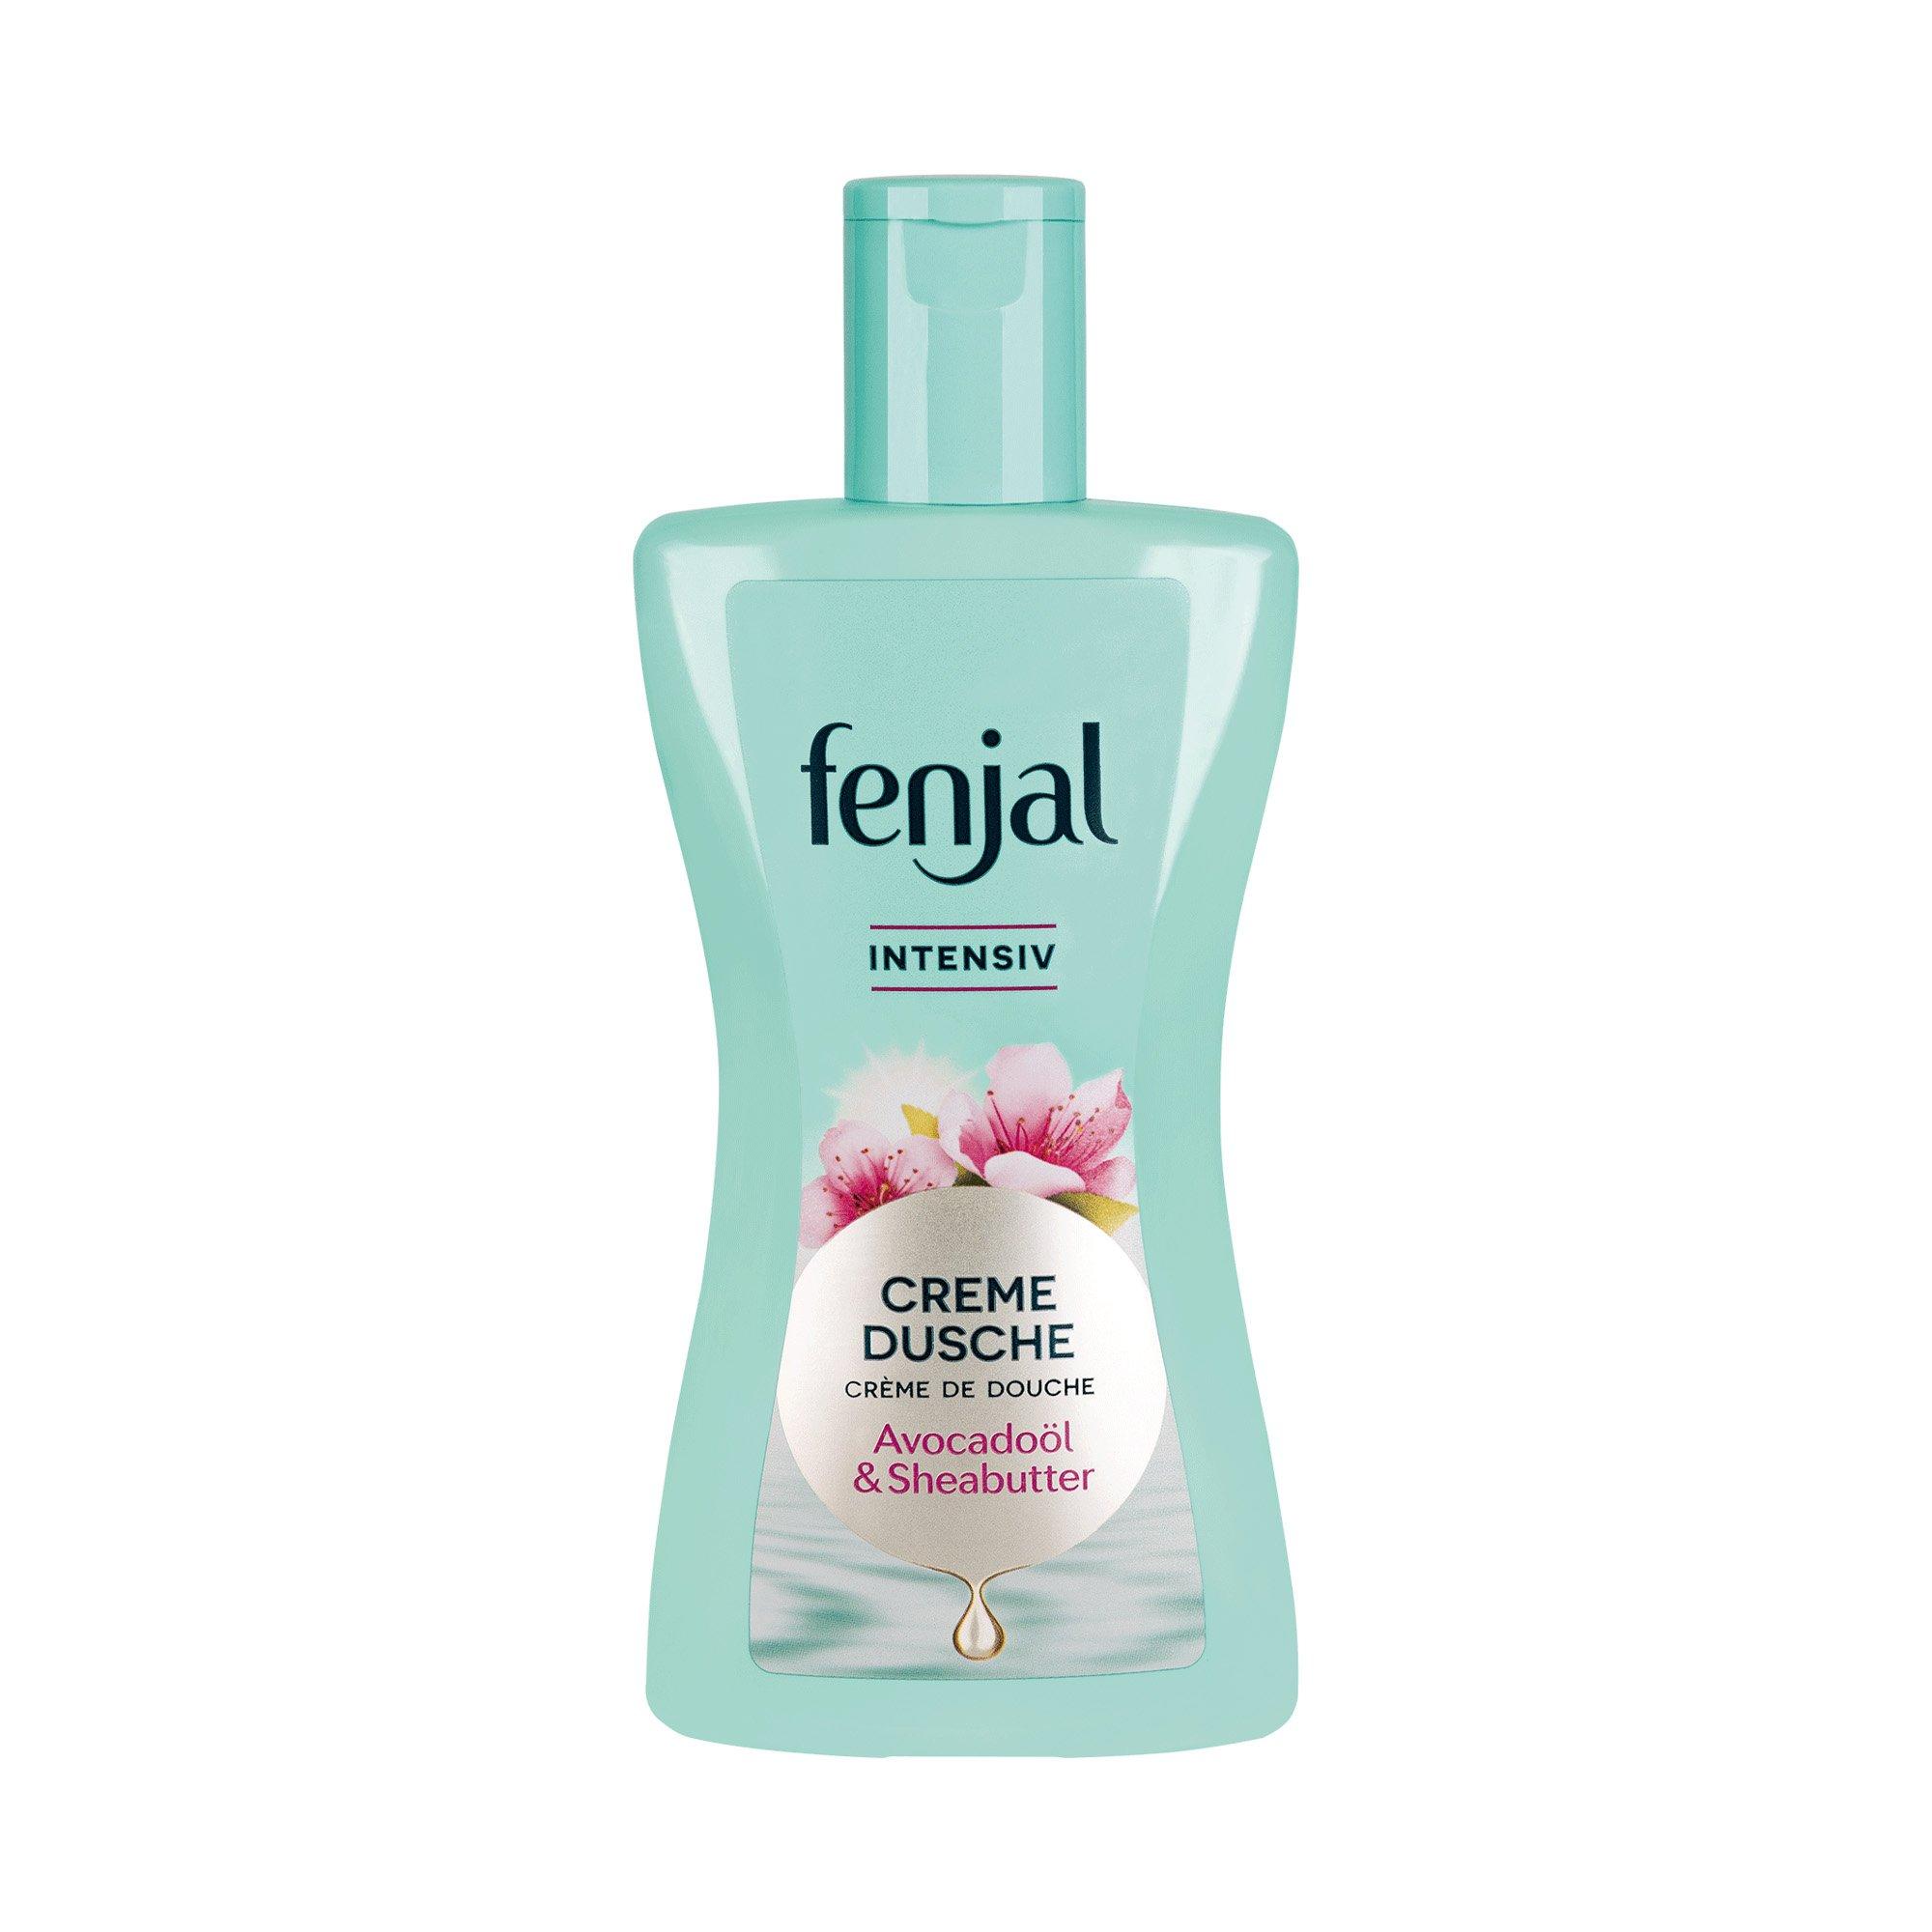 Image of fenjal Creme Dusche Intensive - 200ml